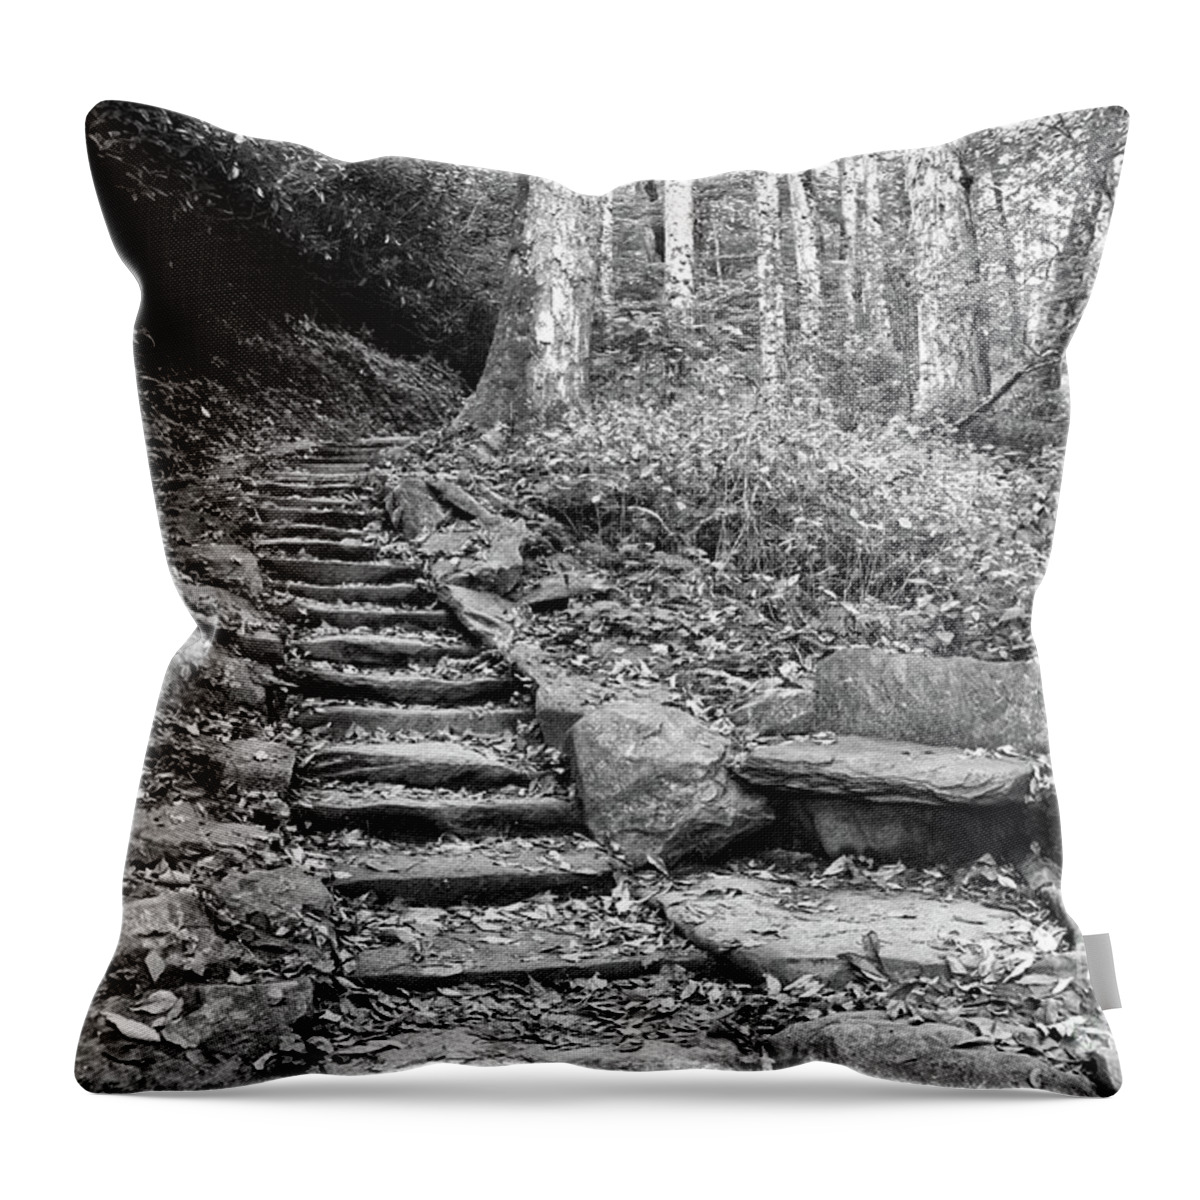 Black And White Throw Pillow featuring the photograph Black And White Stone Bench by Phil Perkins